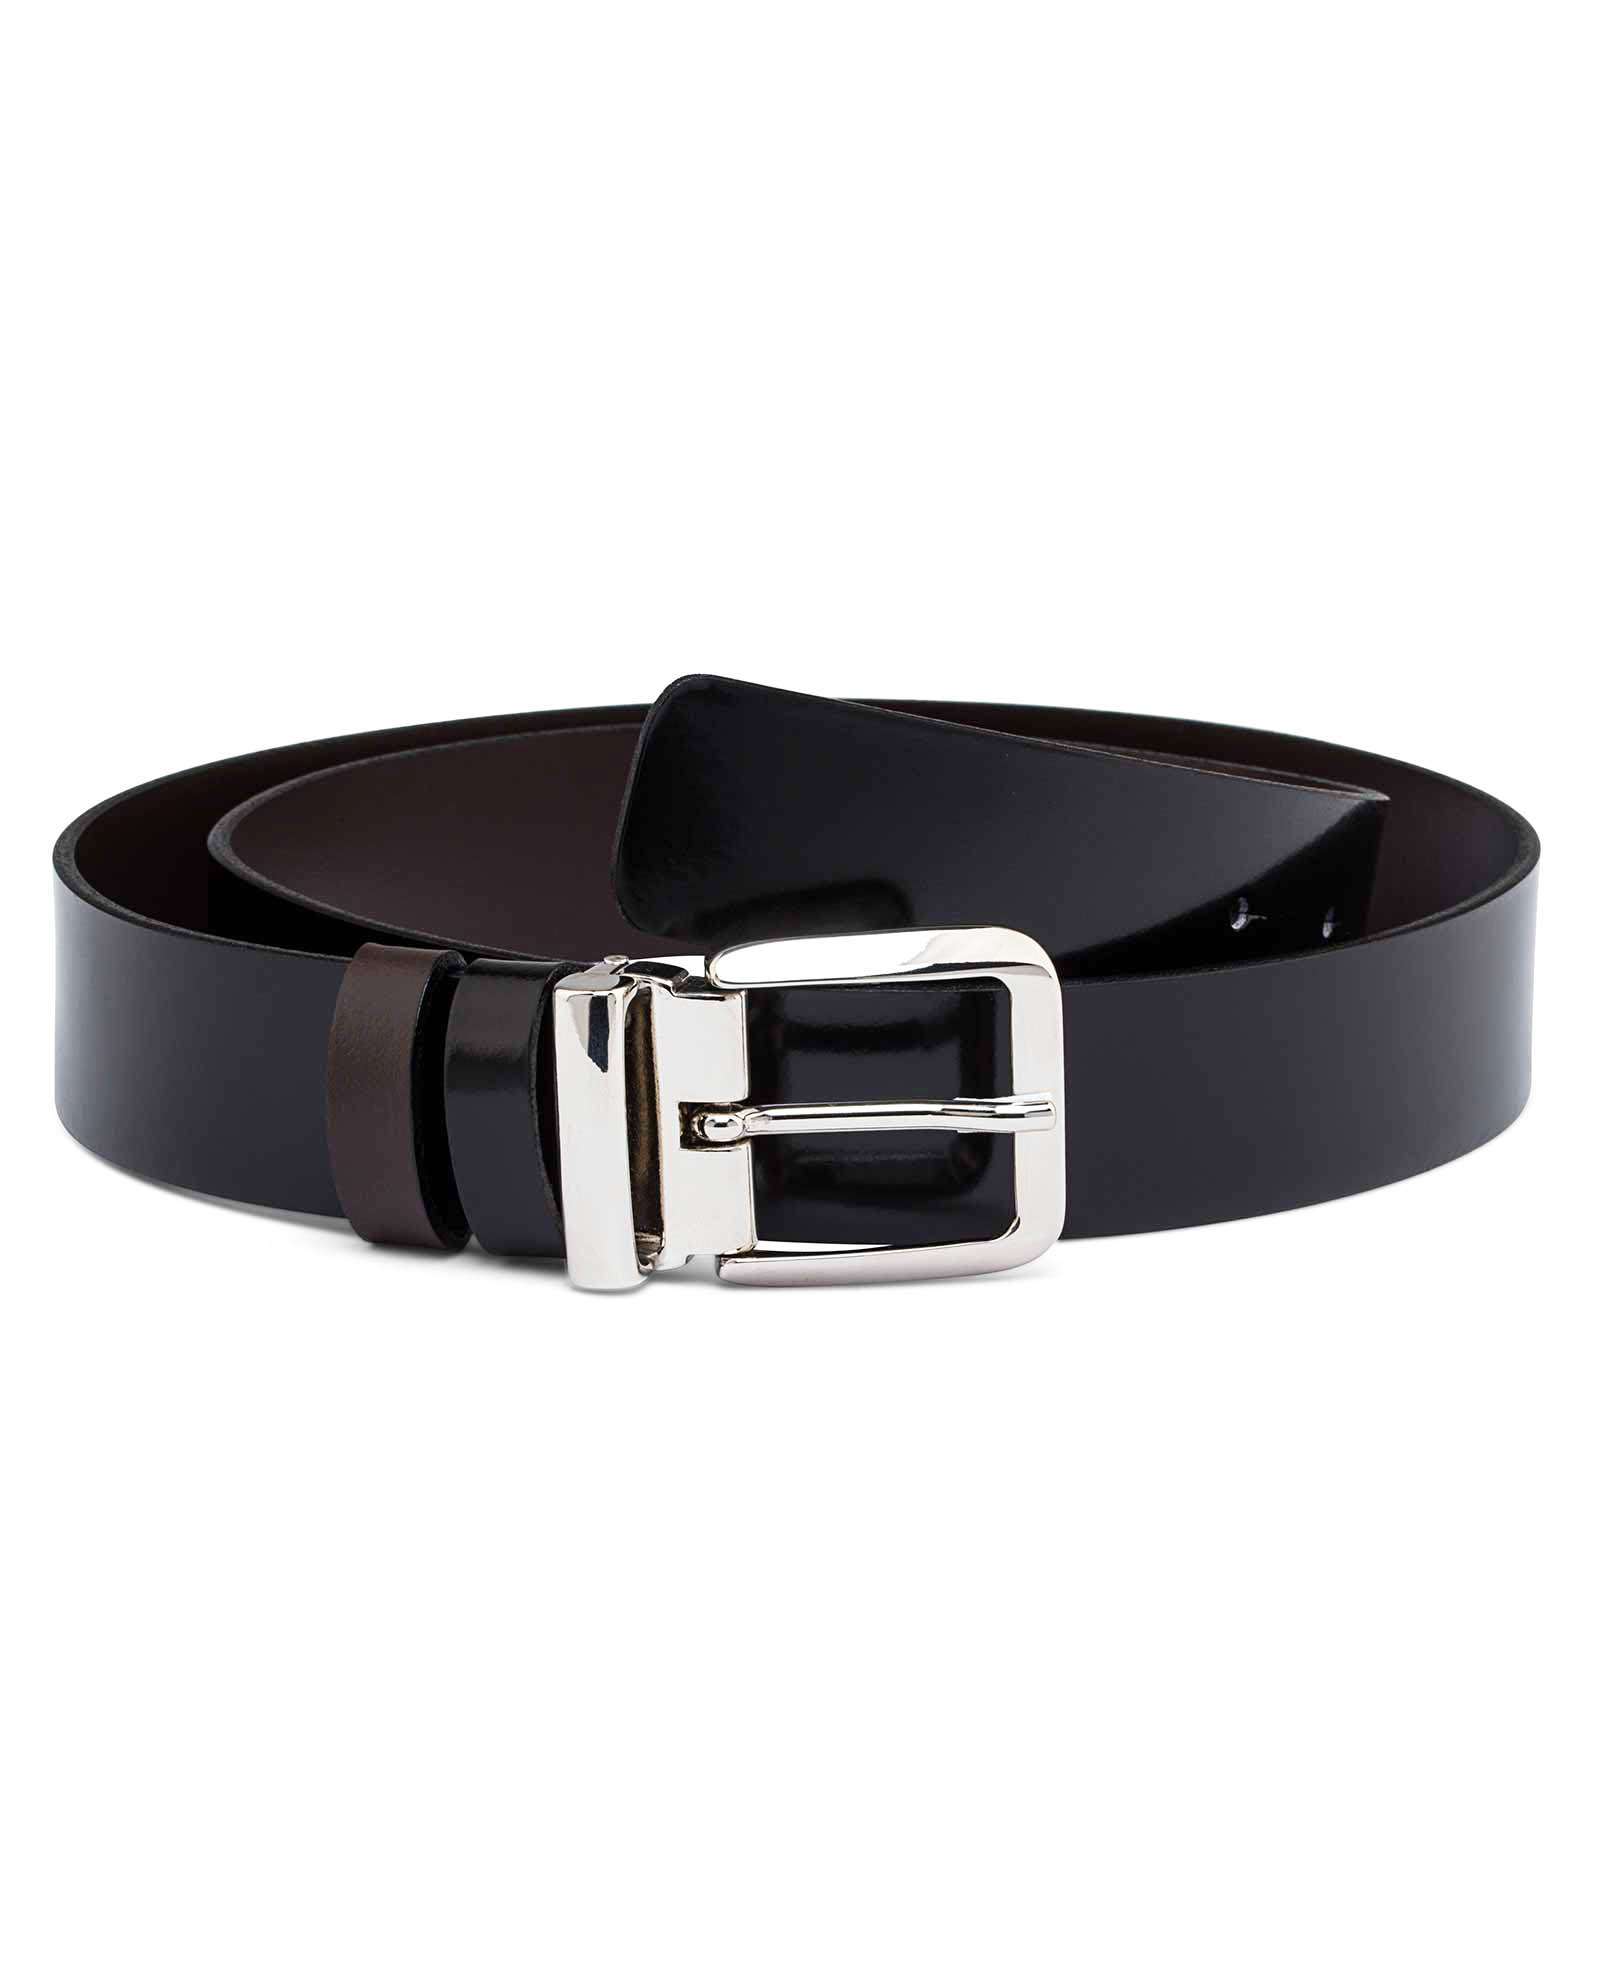 Buy Black Patent Leather Belt | Reversible Brown | Free Shipping!